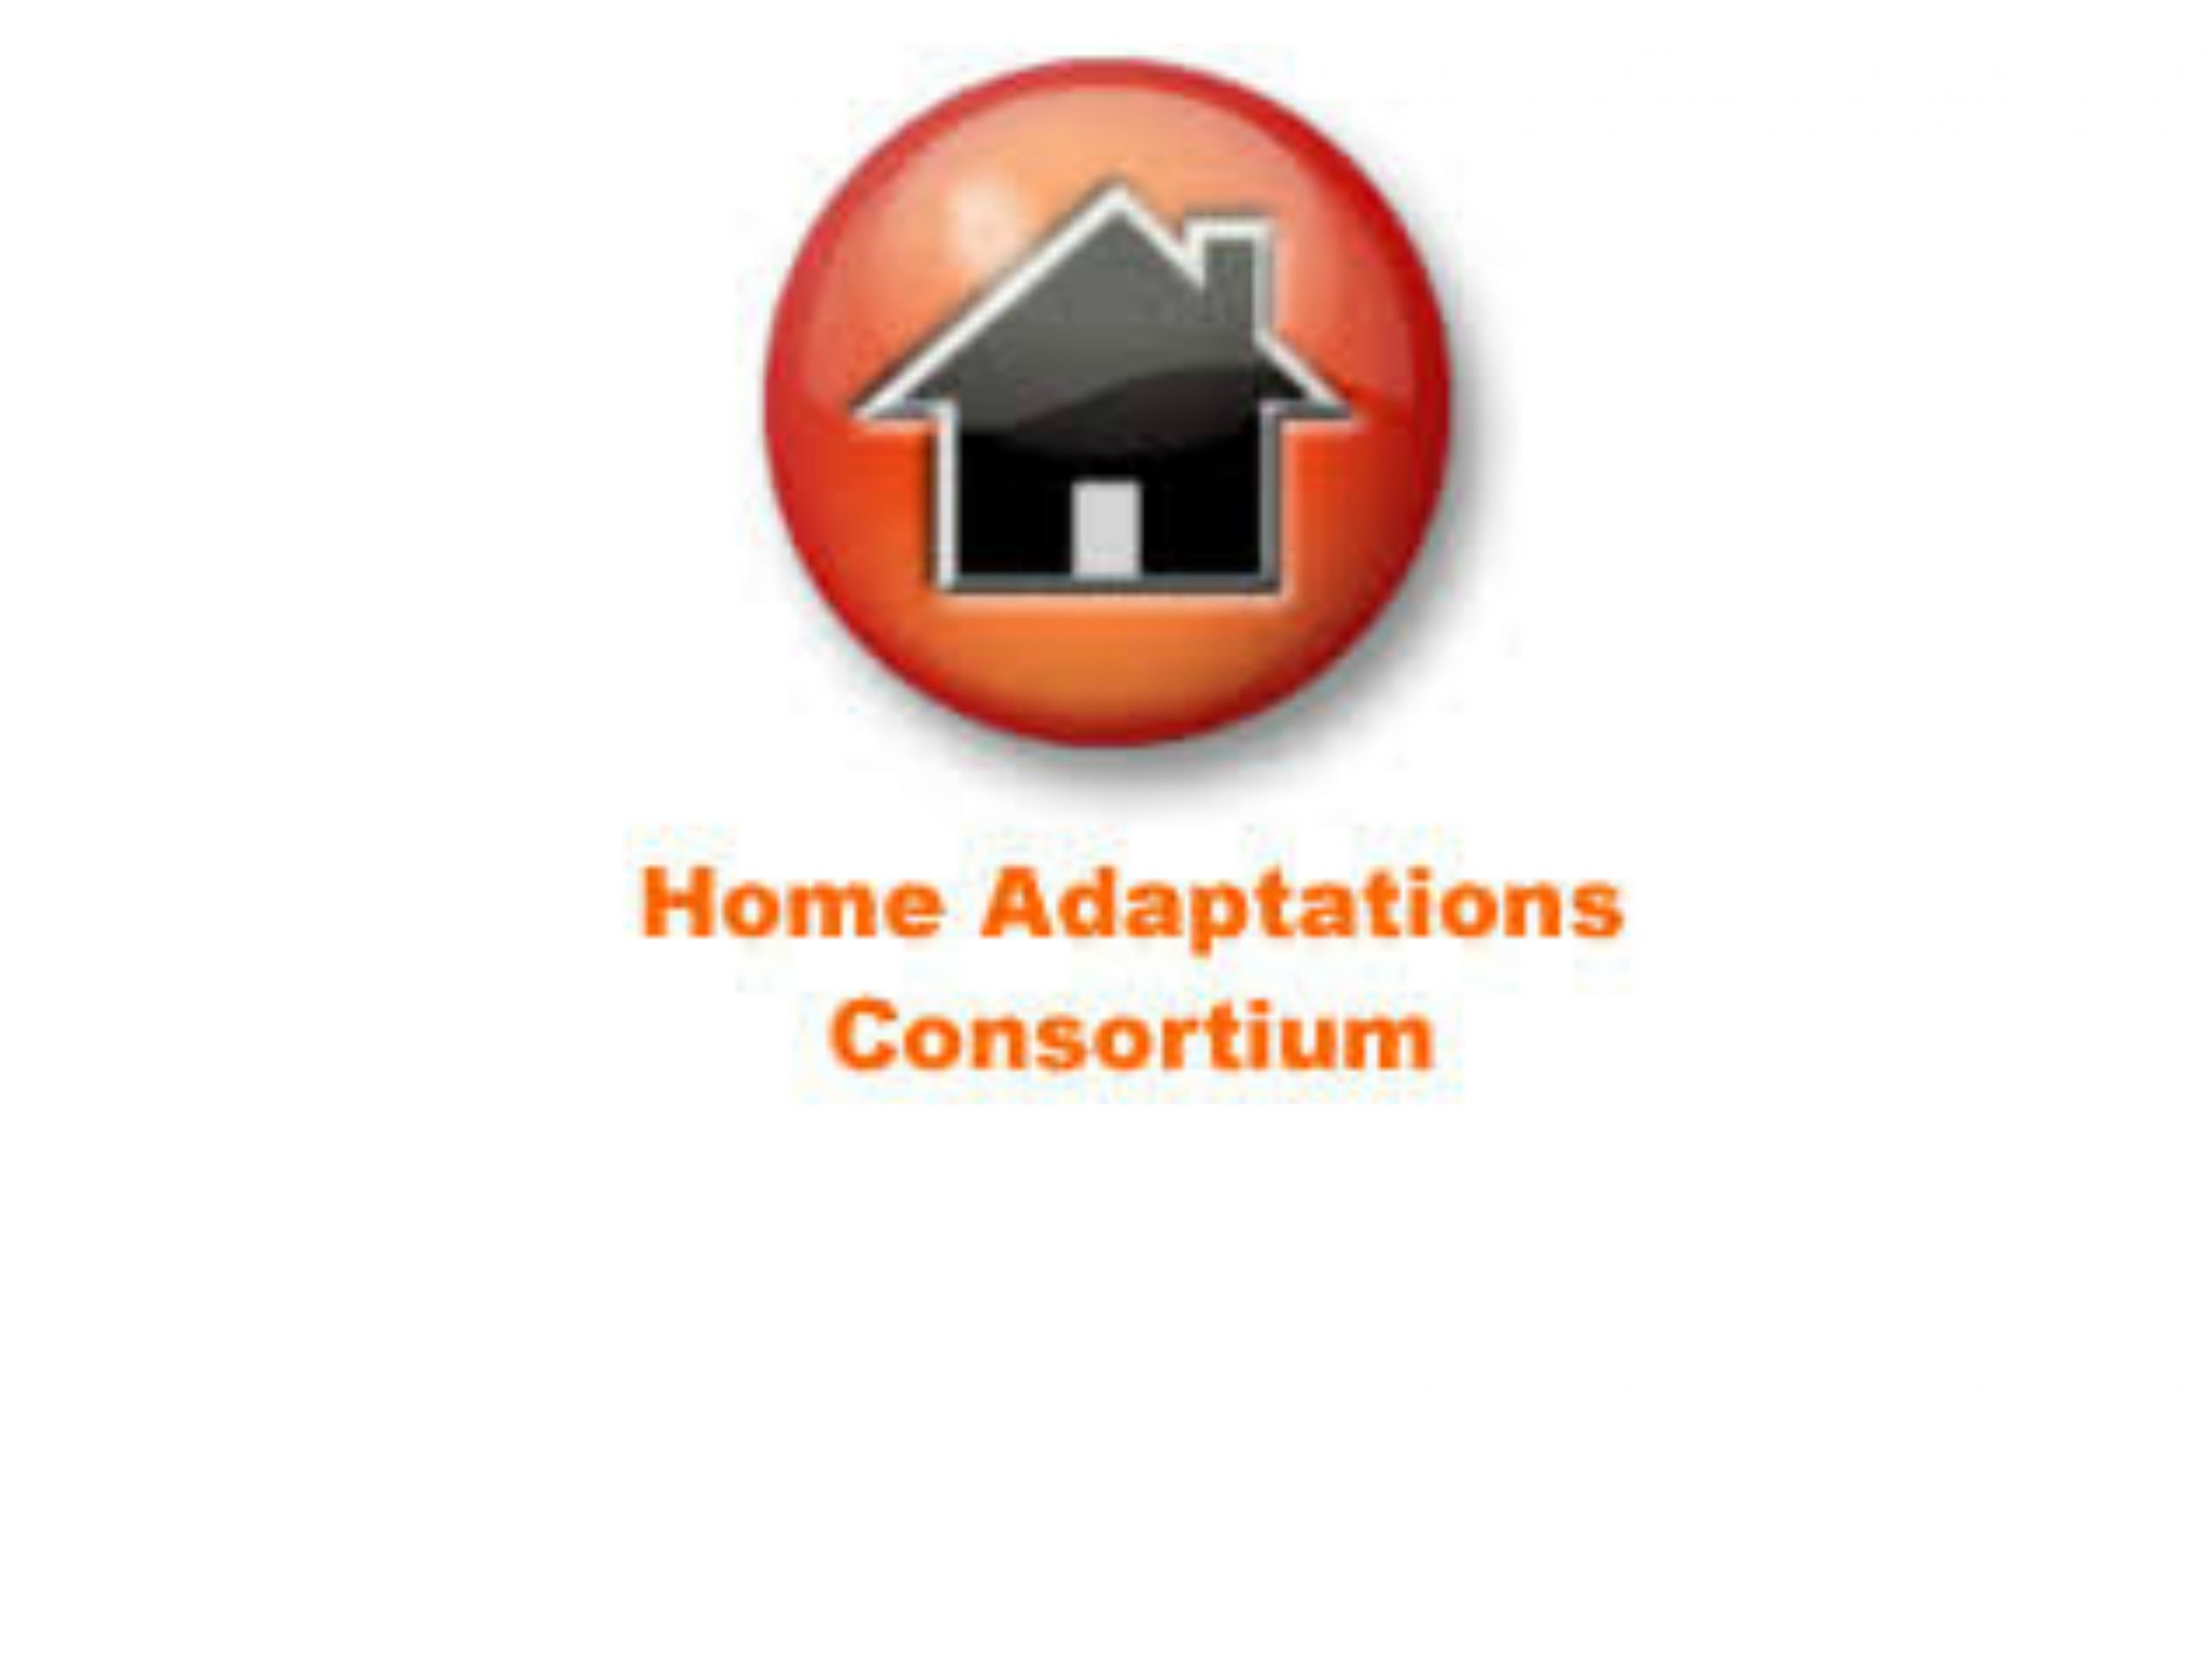 Integration in Action – Innovation in Home Adaptations Delivery